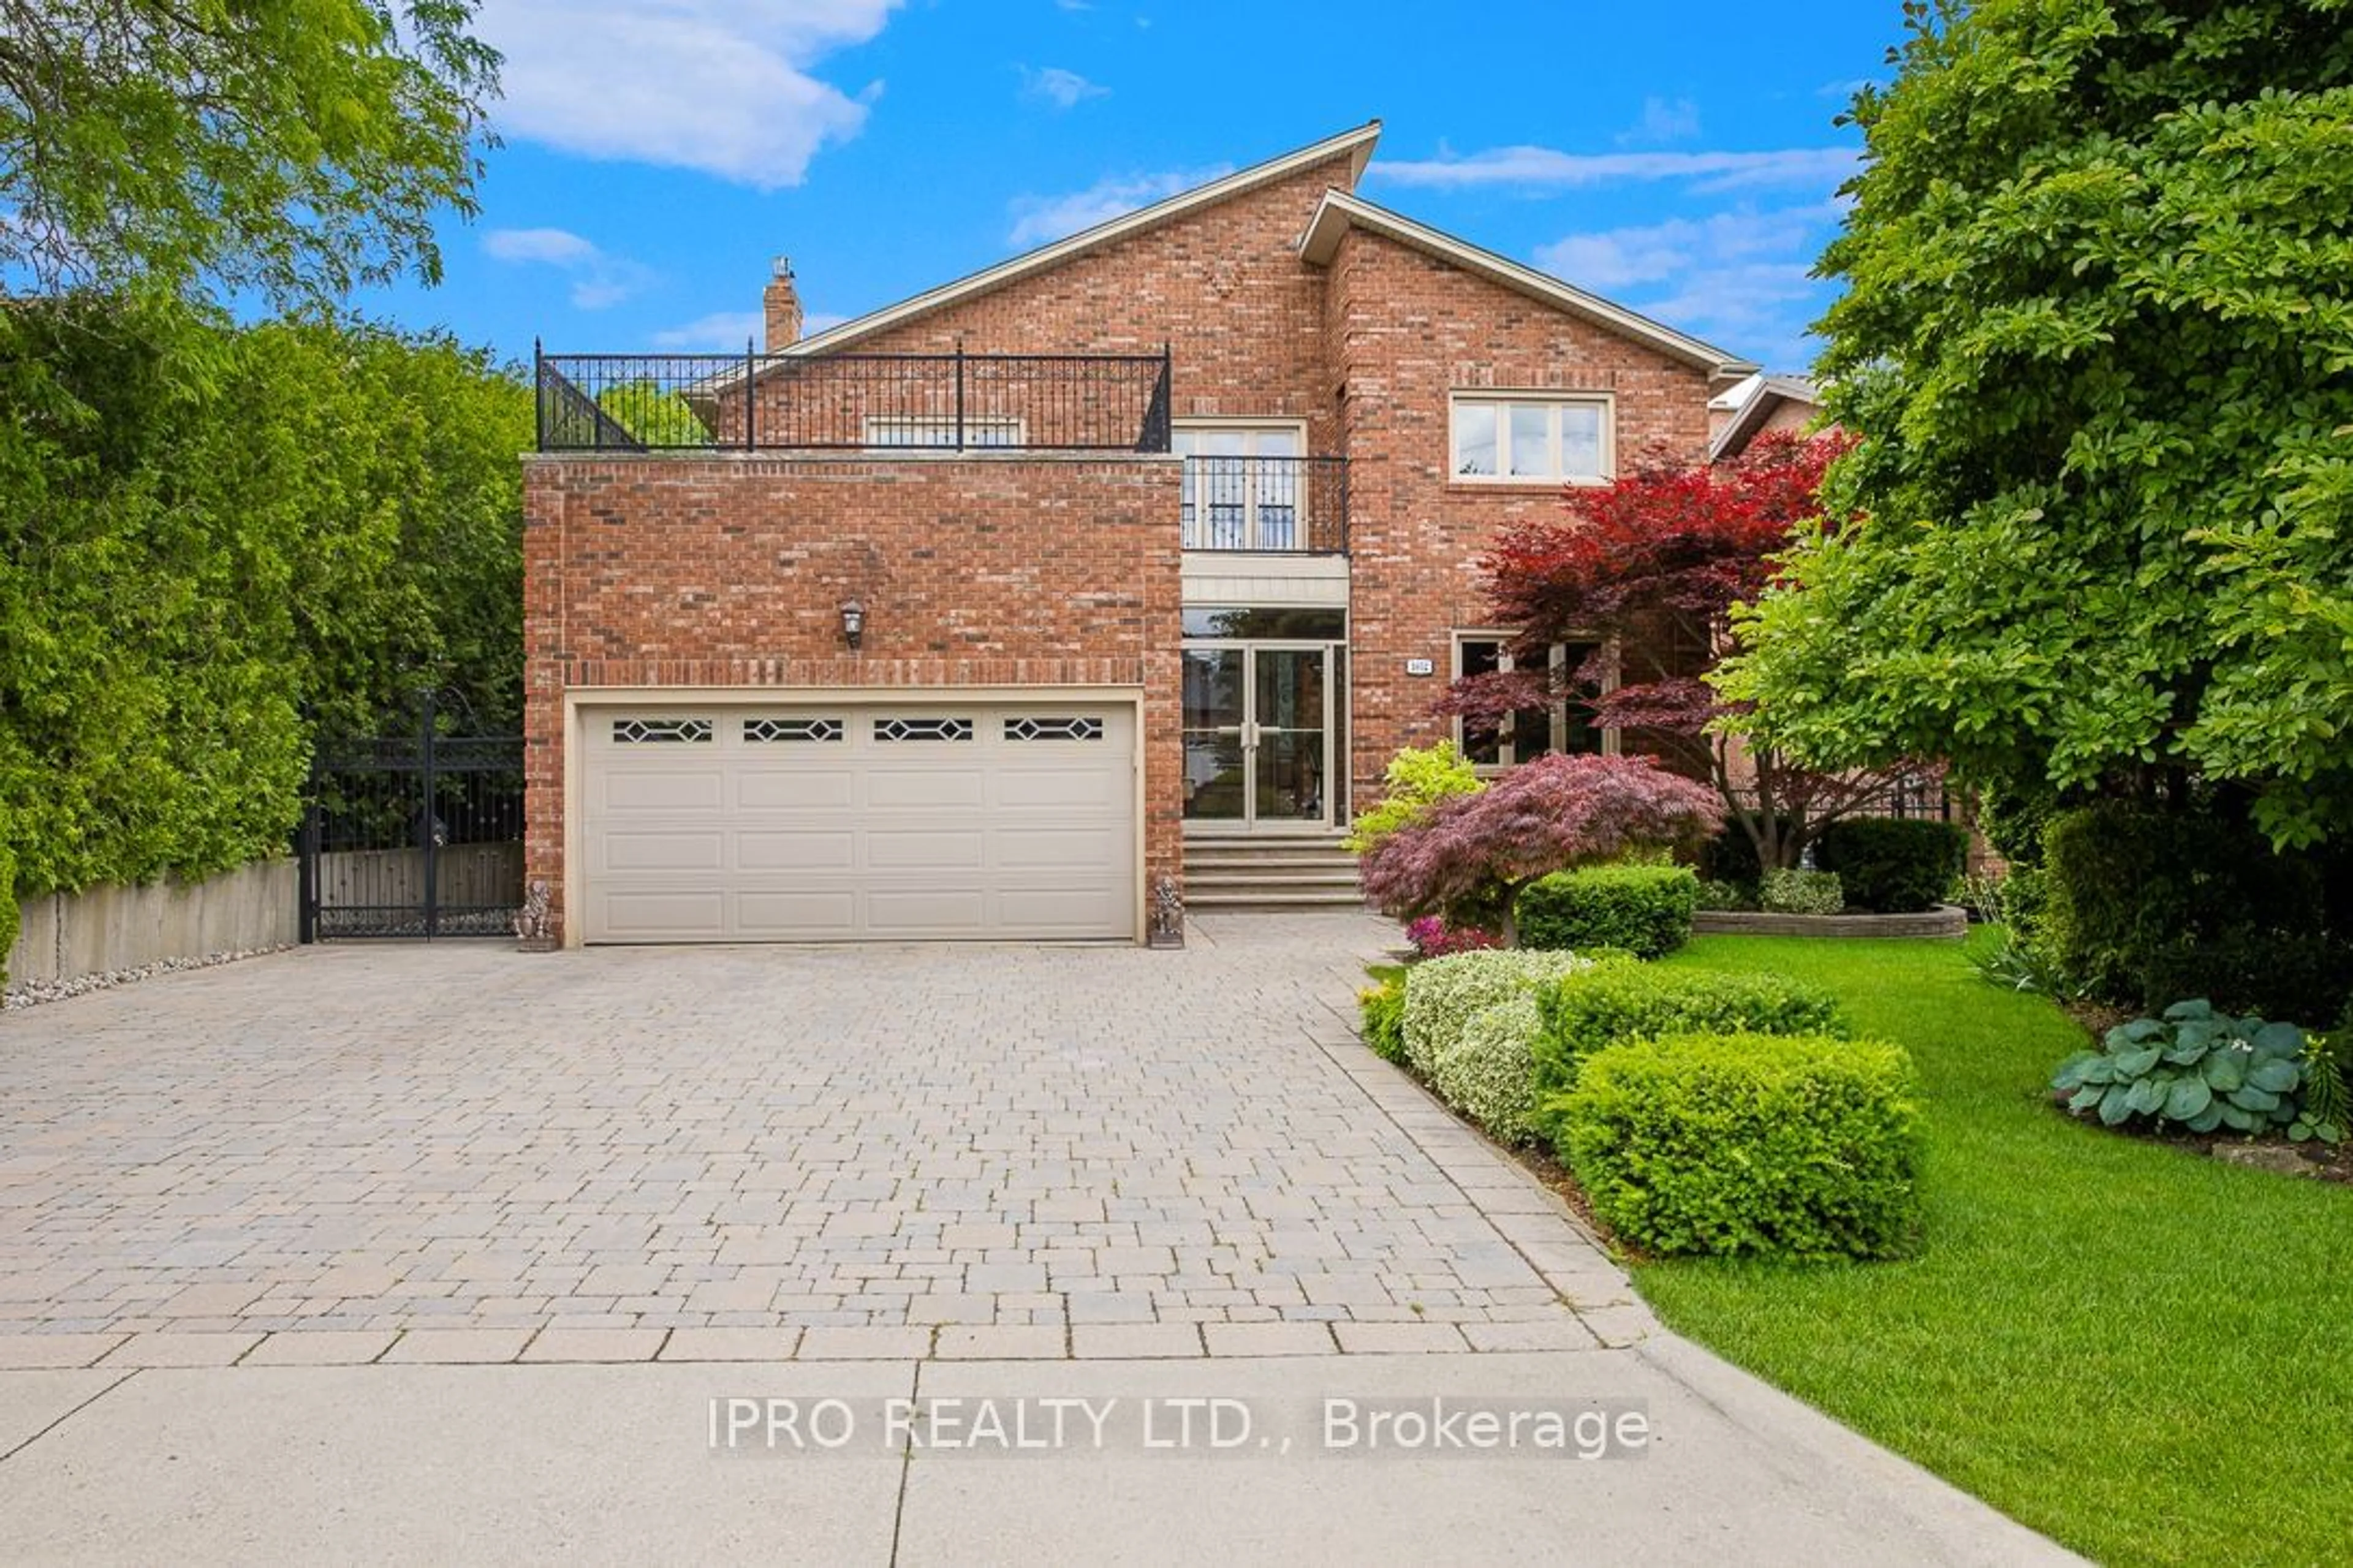 Home with brick exterior material for 1652 Carolyn Rd, Mississauga Ontario L5M 2E1